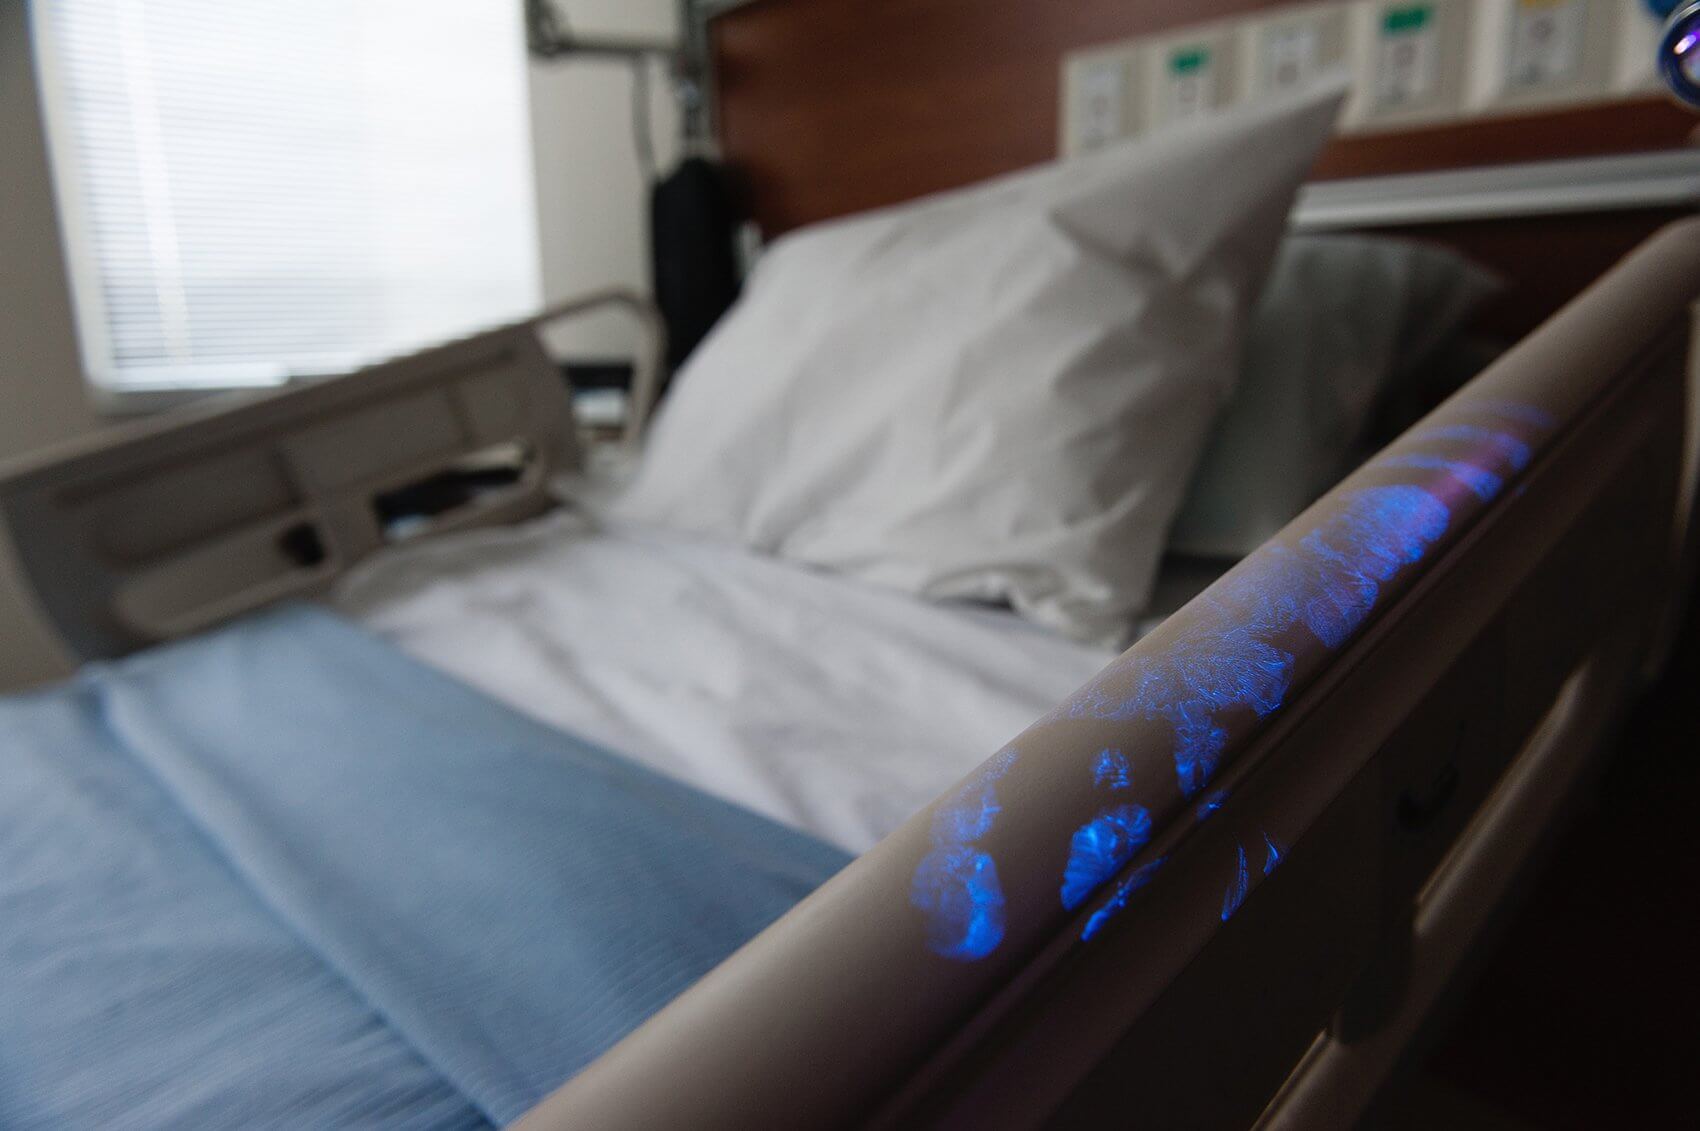 UV light shows surface contamination in a hospital setting. Credit: Texas A&M Health Science Center)